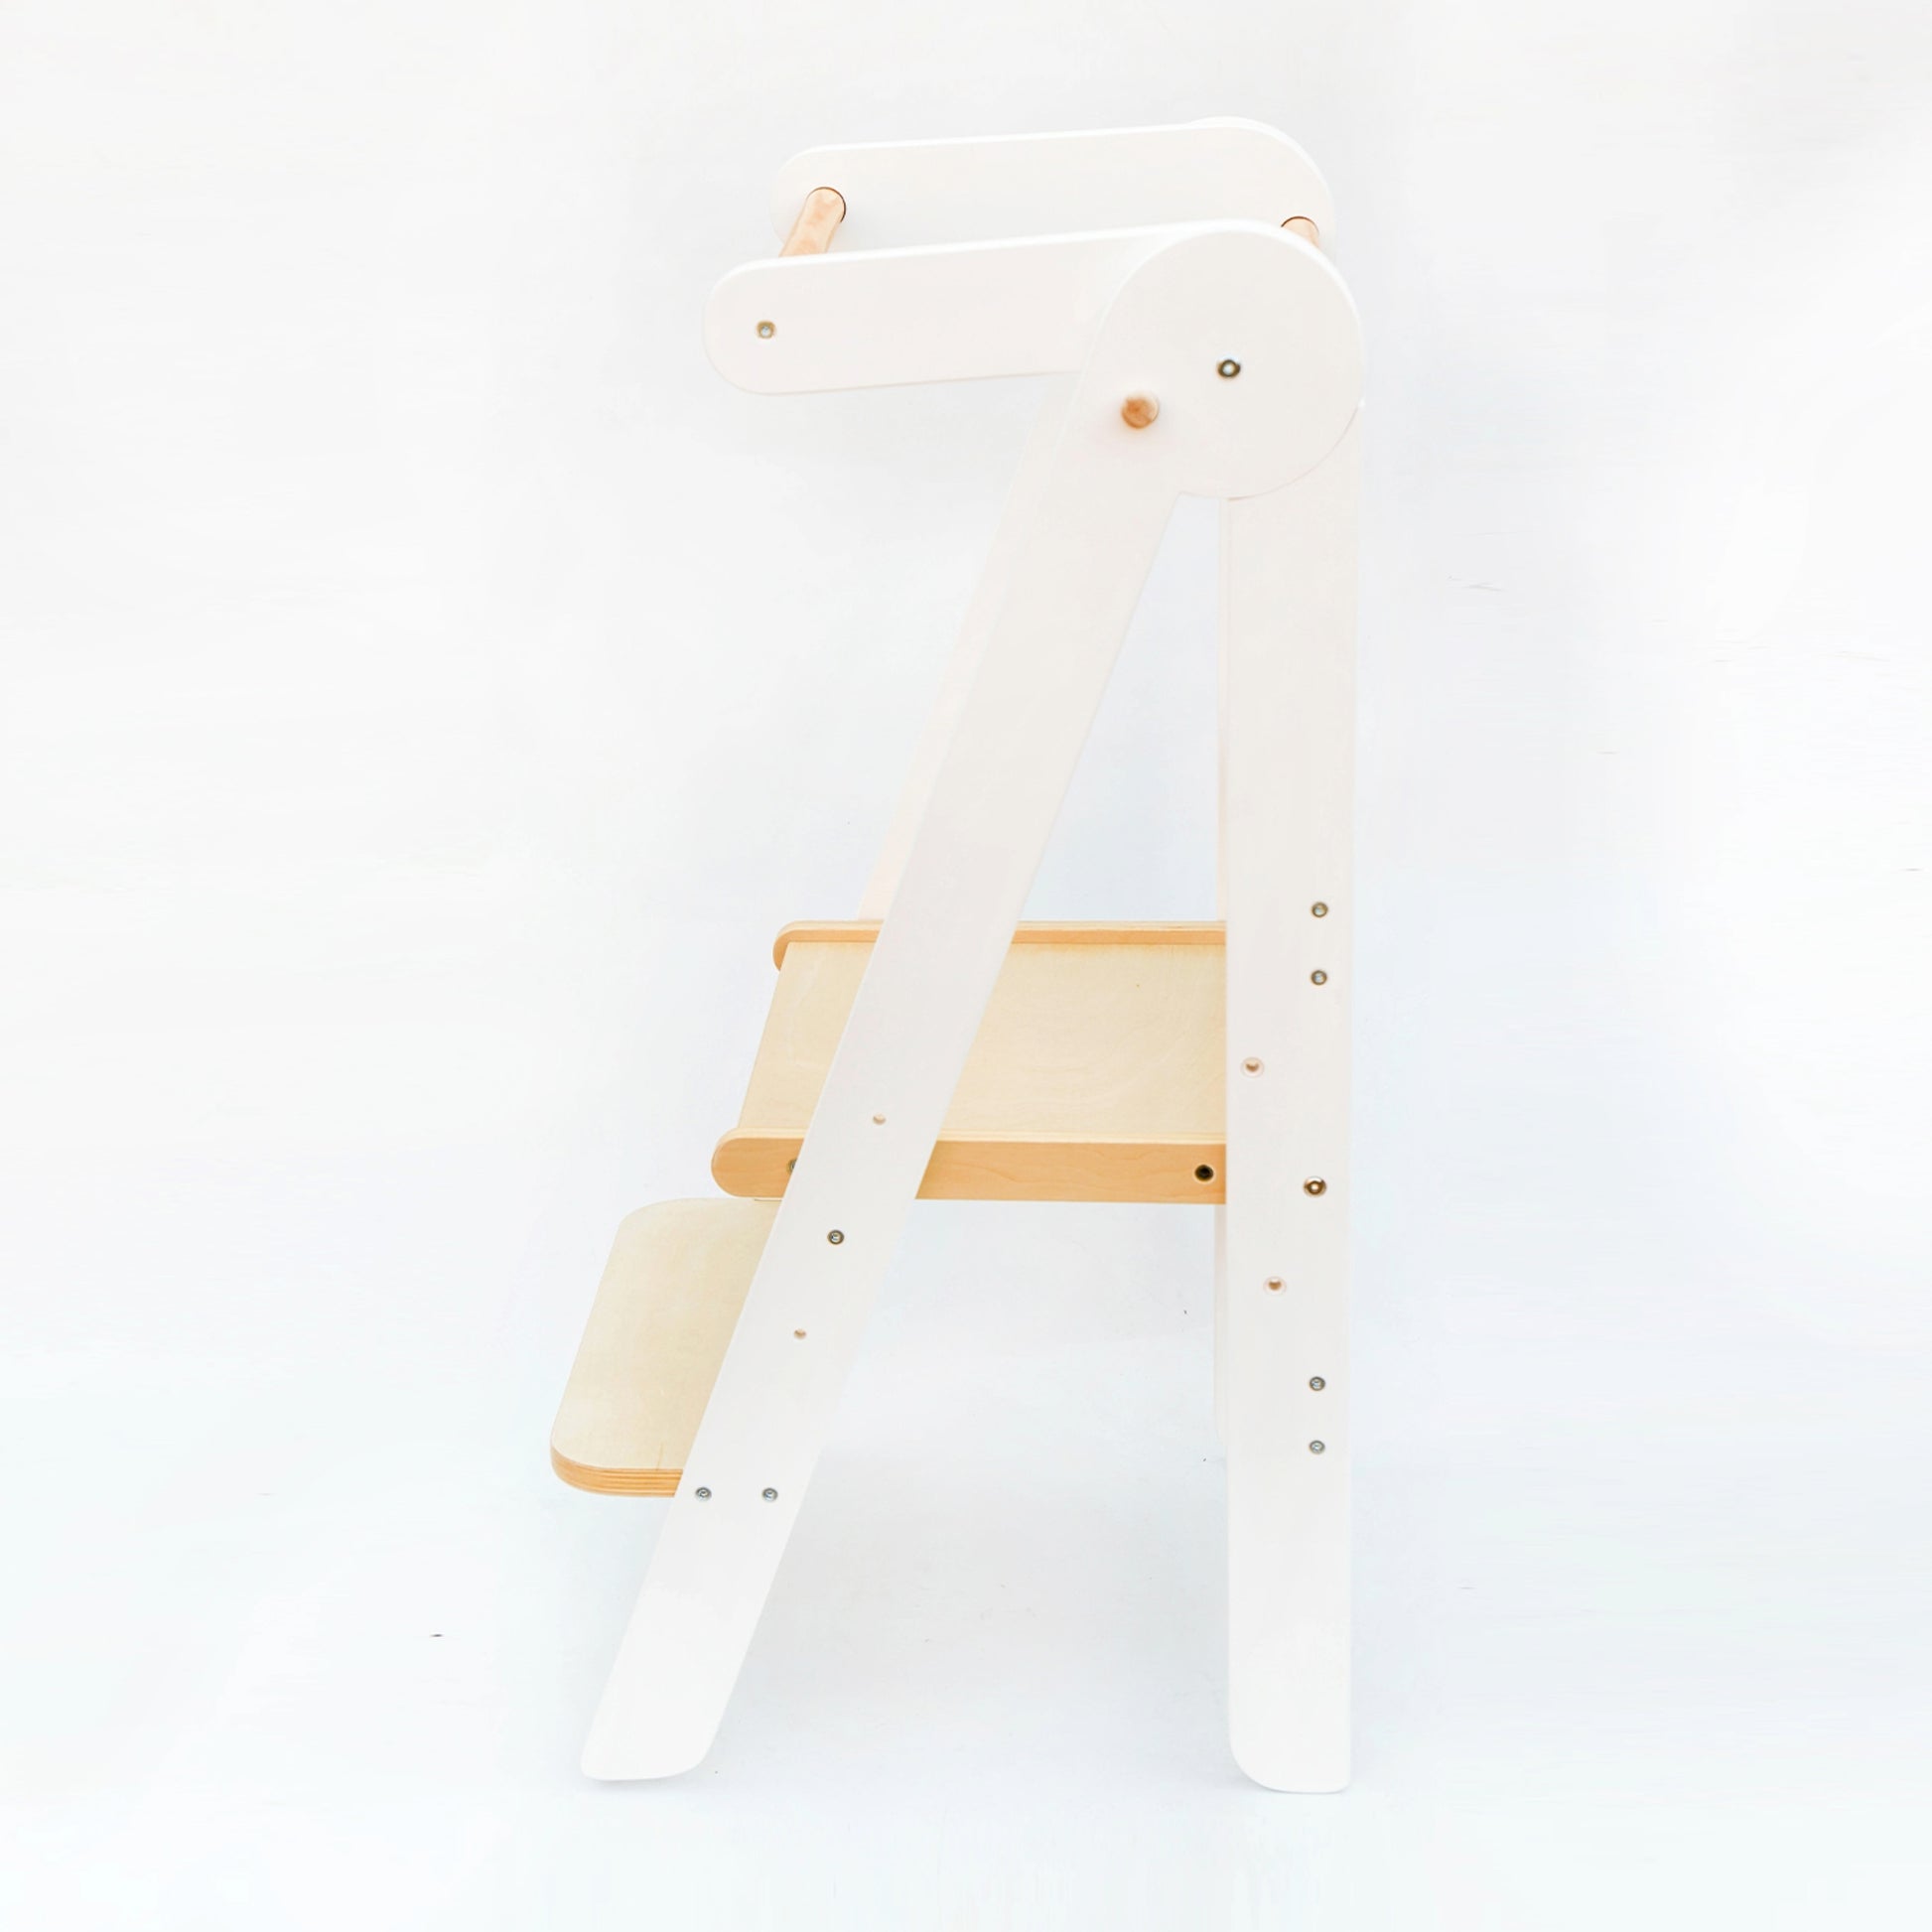 Side view of the White Adjustable Foldable Learning Tower illustrating the sleek design and stability on a white background.